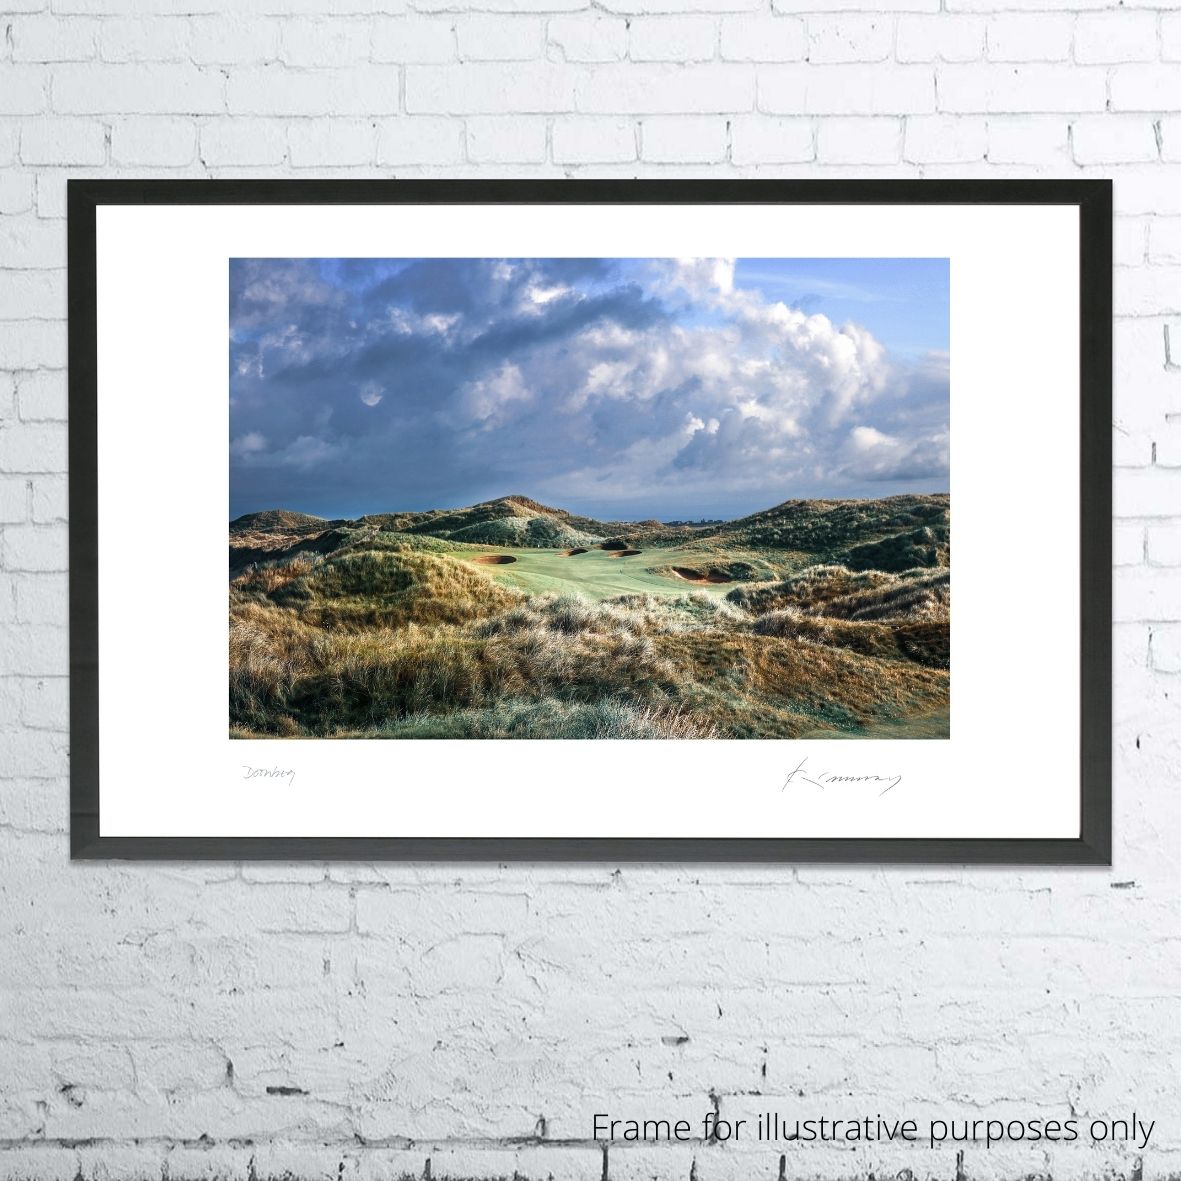 A framed photograph of Doonbeg as shot by Kevin Murray. 